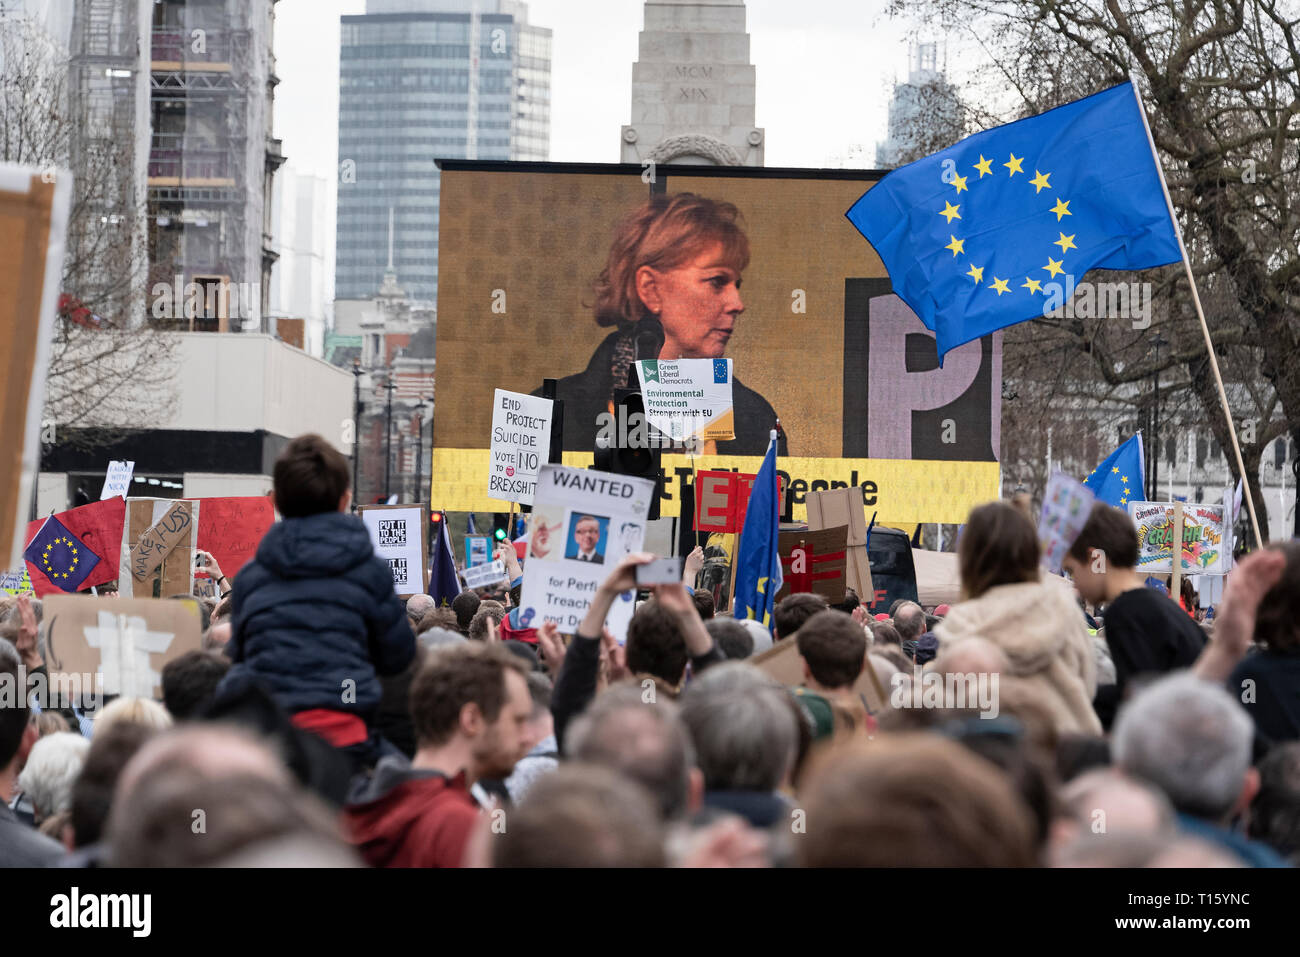 London, UK. 23rd Mar, 2019. Peoples Vote March, Anna Soubry screen. Crowd detail and banners as taken from the perspective of a protester. Remain banners, second referendum. Credit: Tony Pincham/Alamy Live News Stock Photo